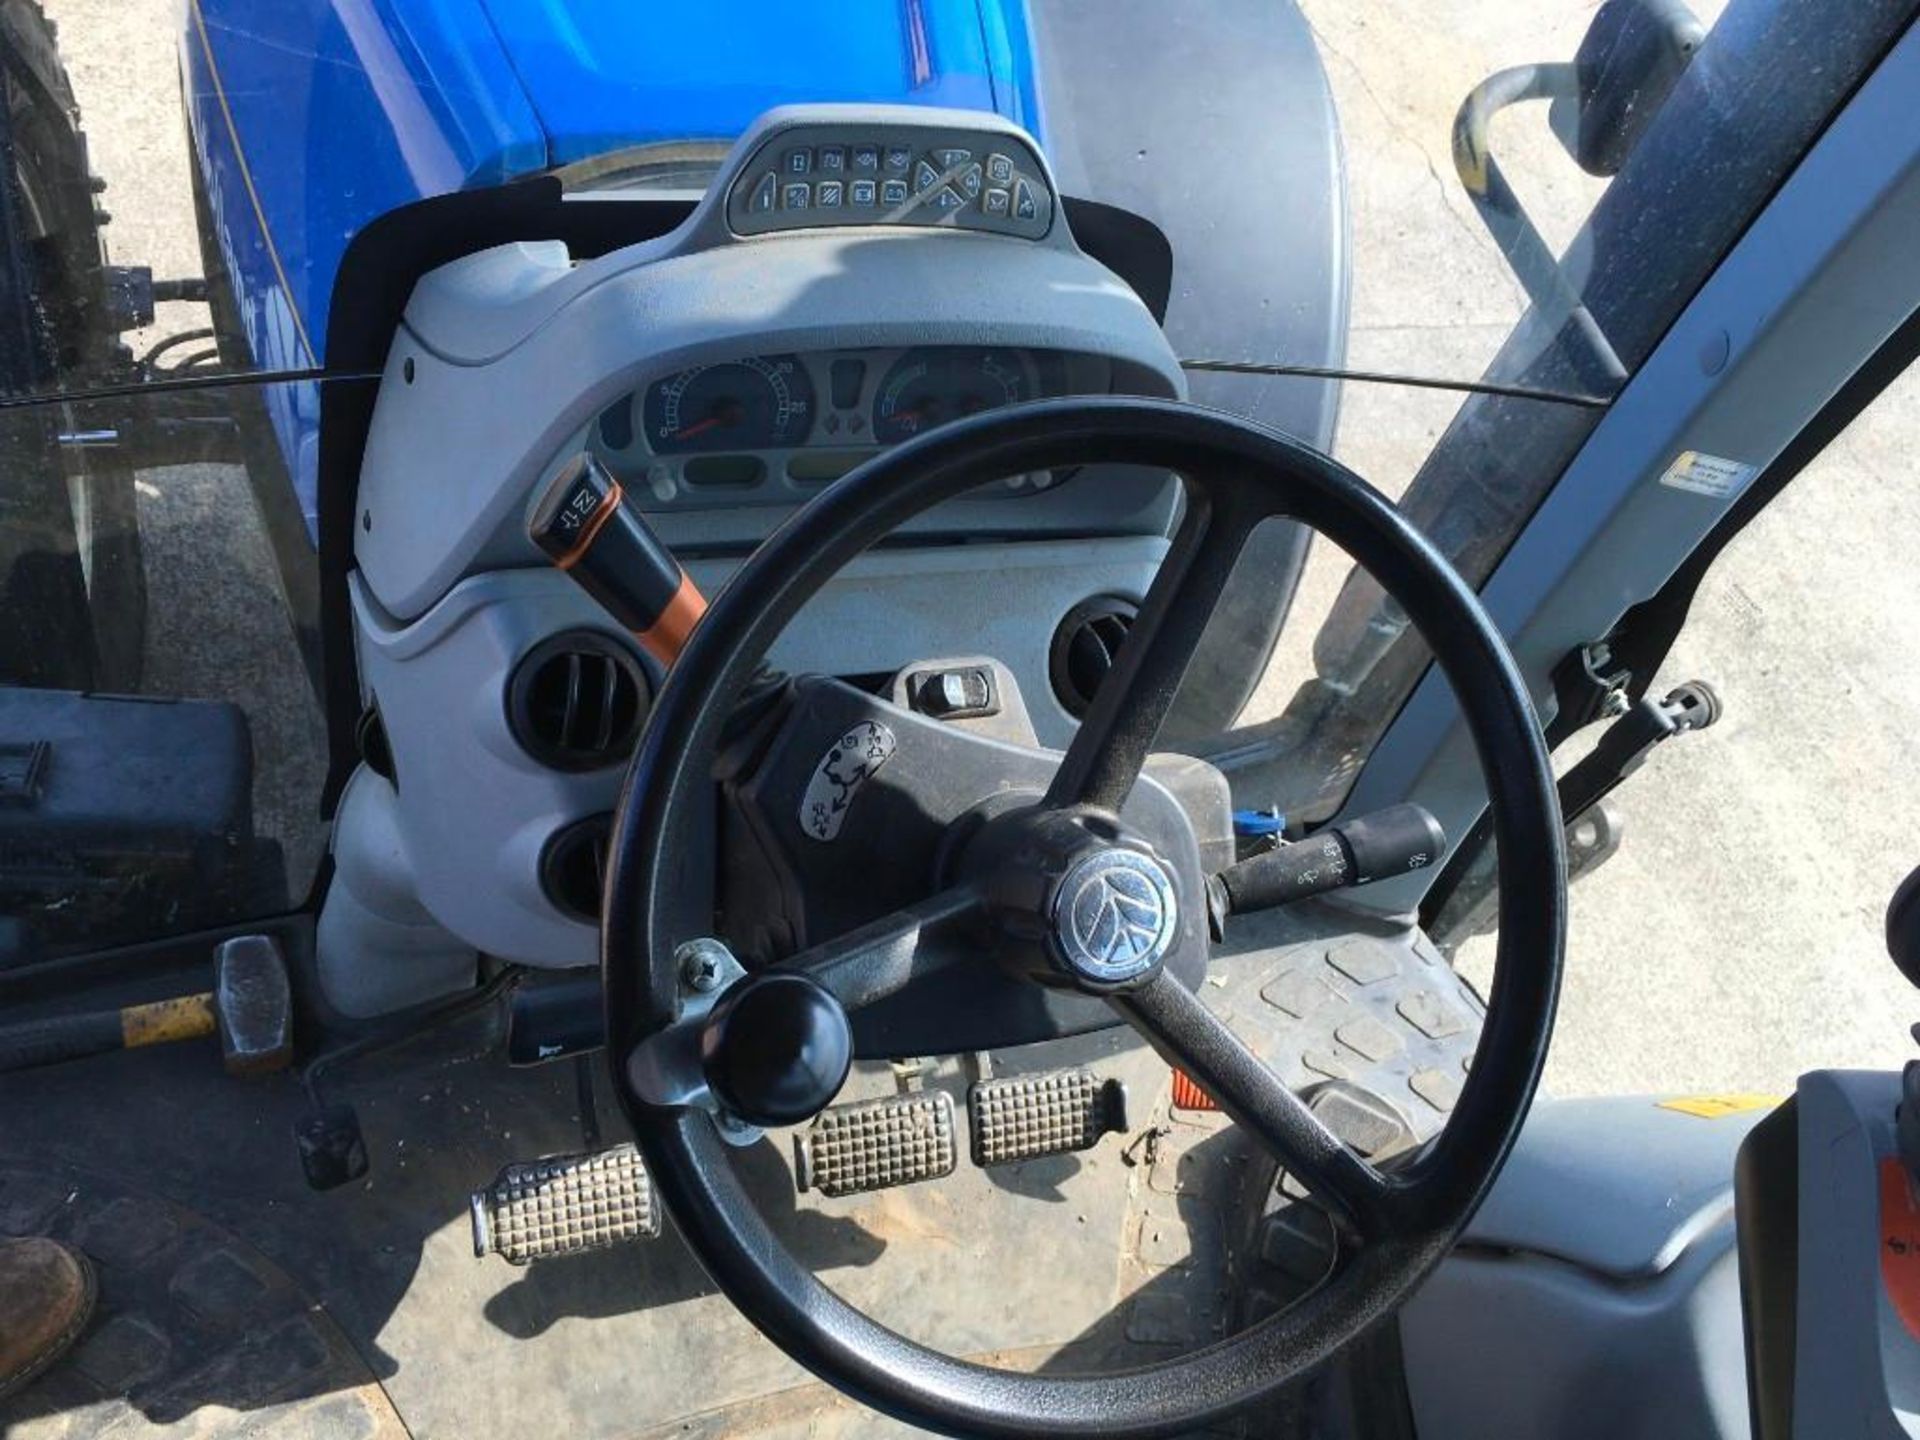 2011 New Holland T7050 Auto Command 4wd tractor with air brakes, front linkage, air seat, - Image 11 of 15